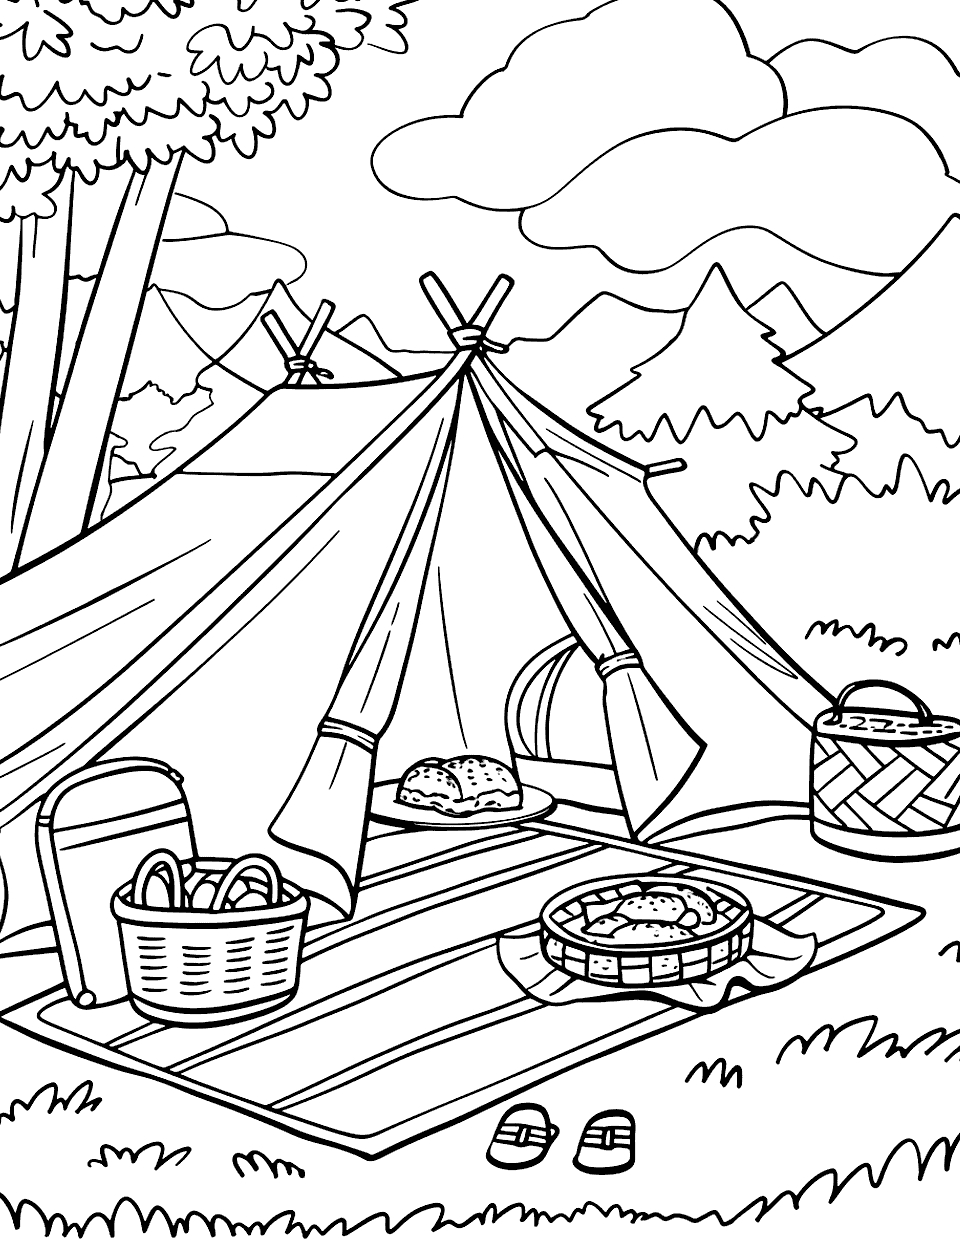 Picnic at the Campsite Camping Coloring Page - A picnic blanket outside a tent, with a basket and food.